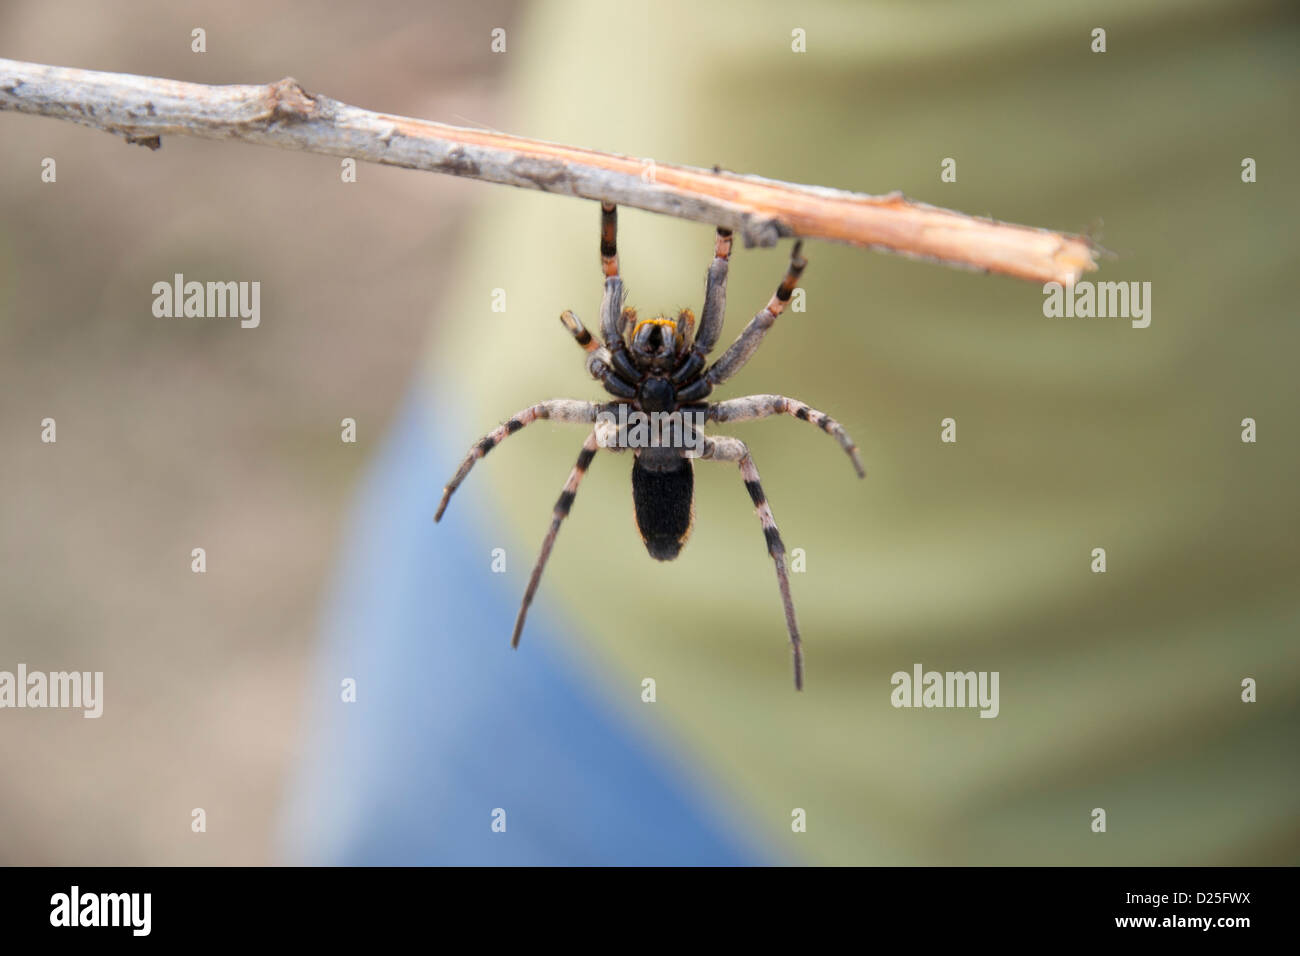 A spider hanging from a stick. Stock Photo